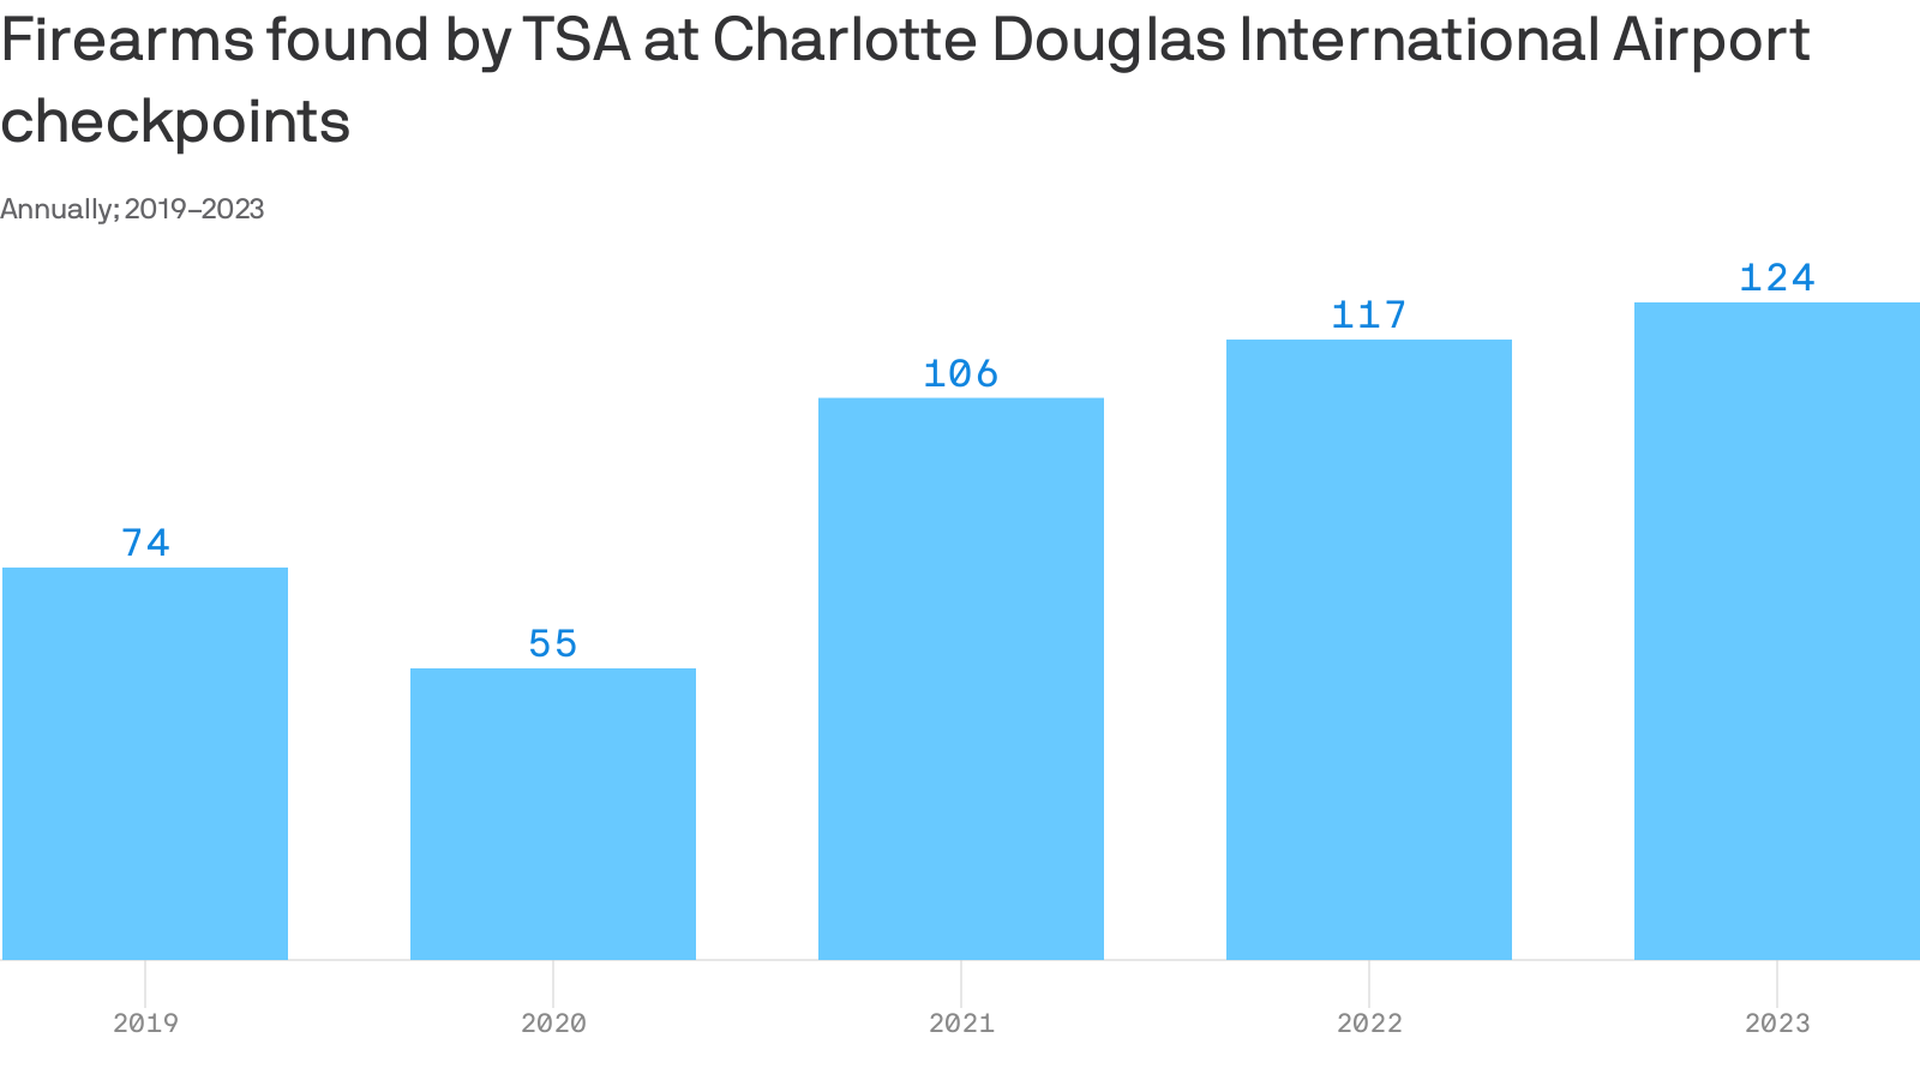 Annual increase in firearms found by TSA at Charlotte Douglas International Airport checkpoints from 2019 to 2023. The number rose from 74 in 2019 to 124 in 2023"